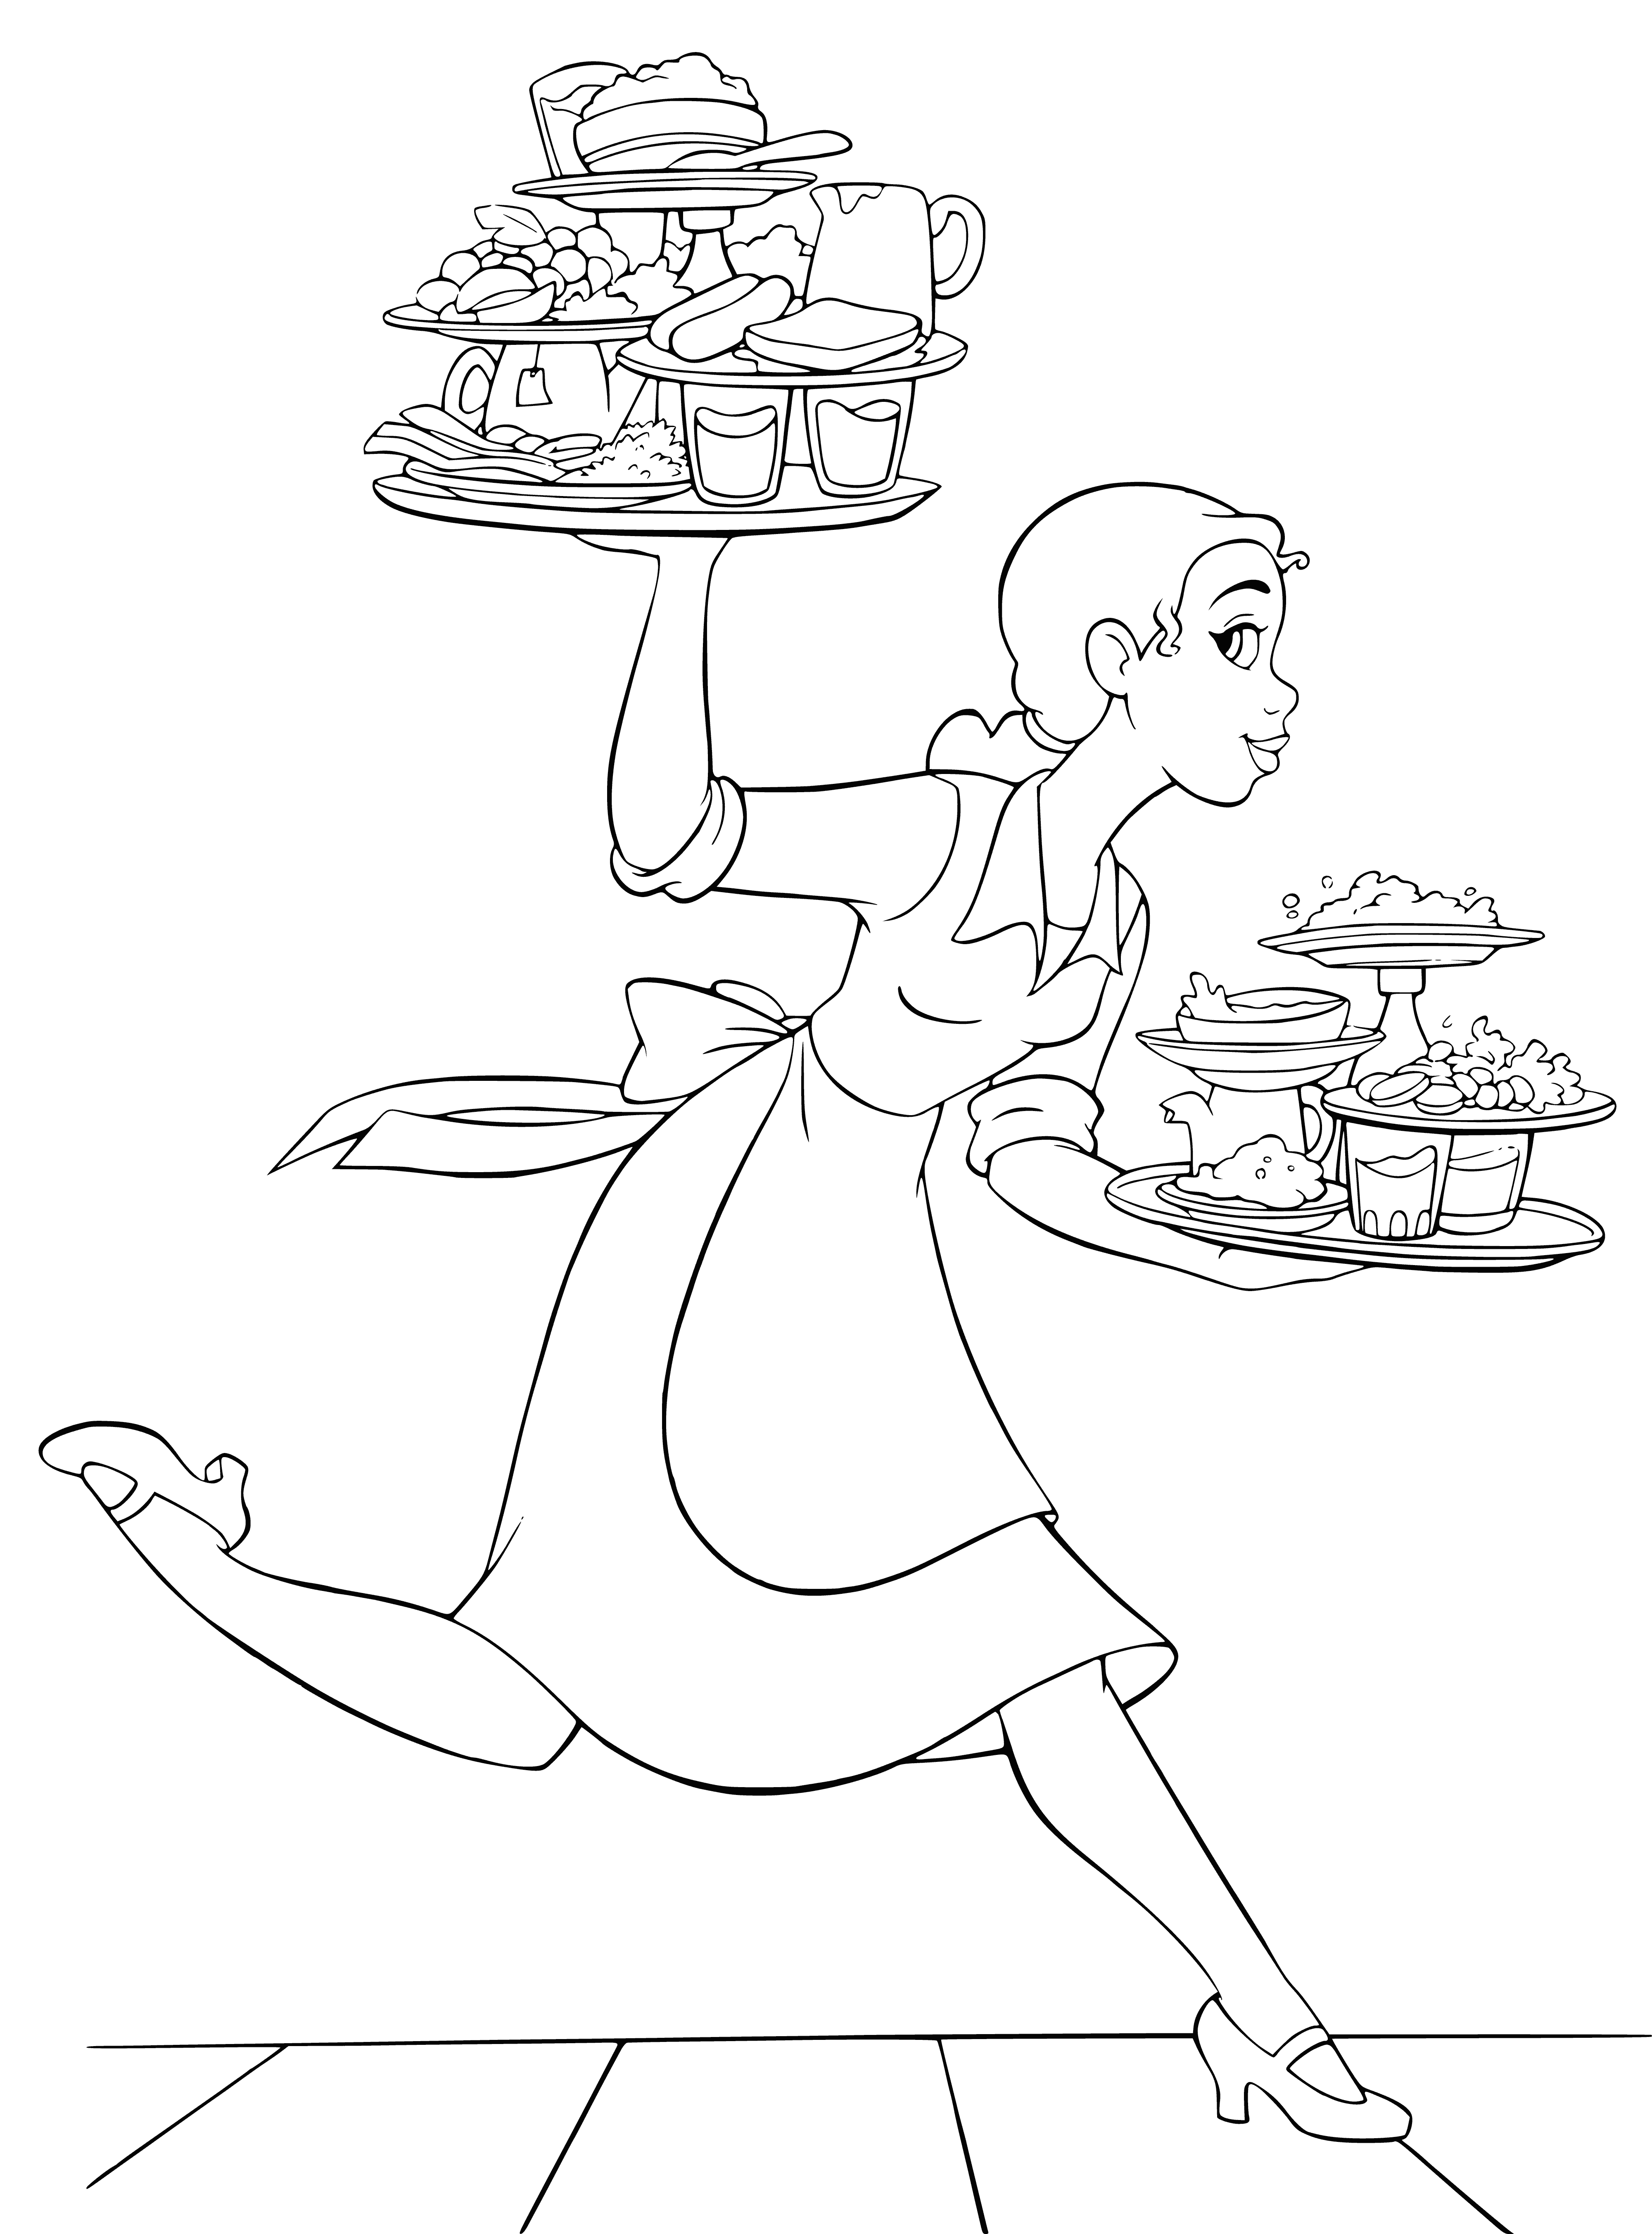 Tiana the waitress coloring page